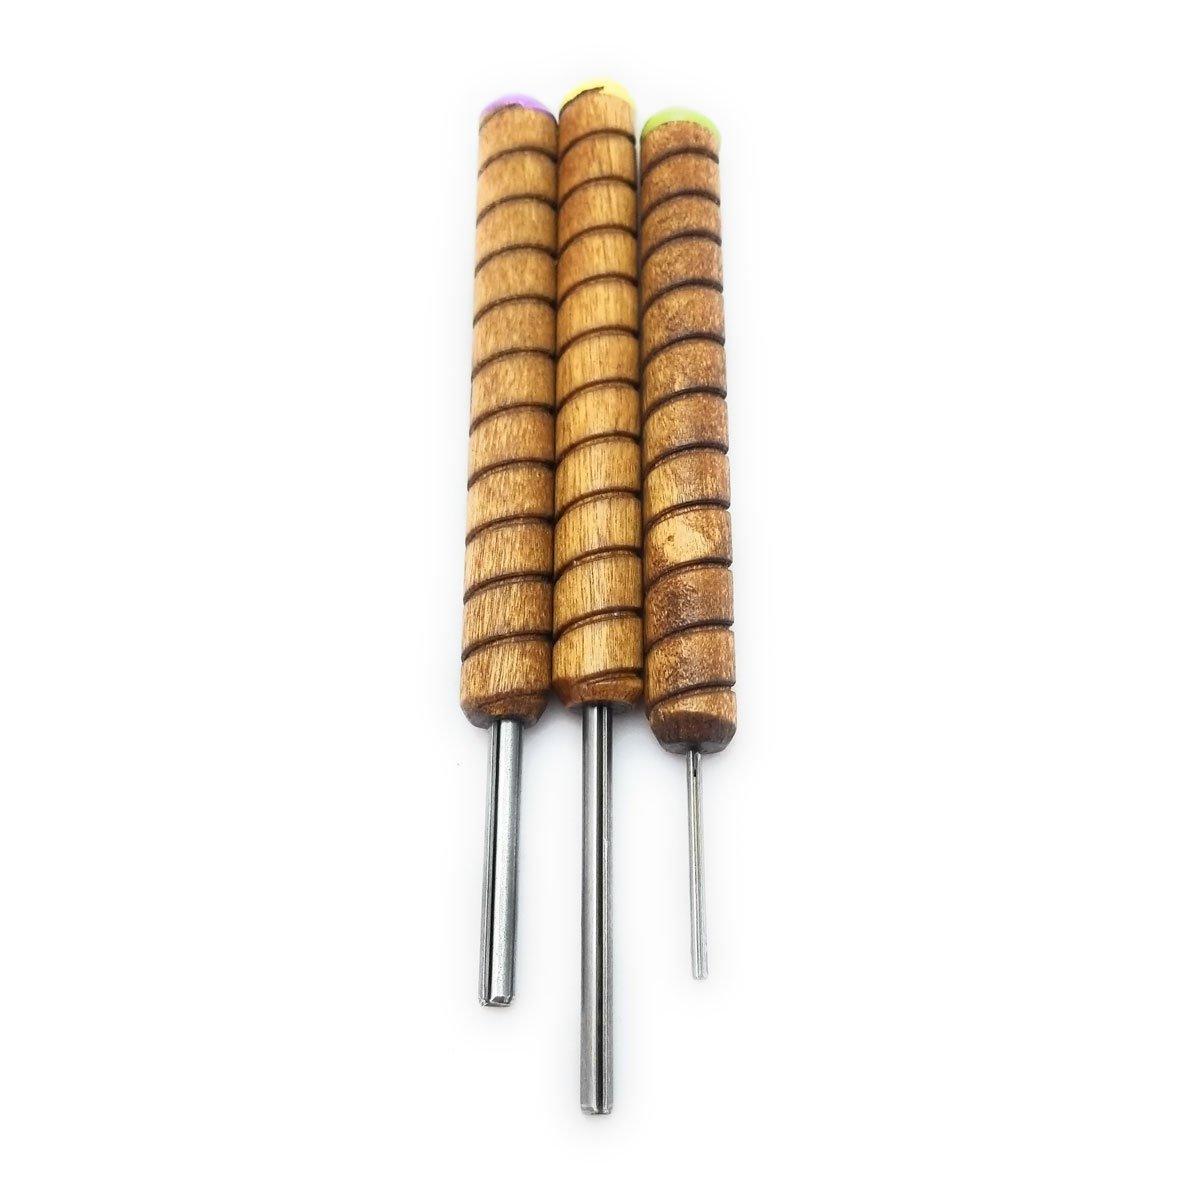 Paper Bead Crafts Slotted Paper Bead Roller Set of 3